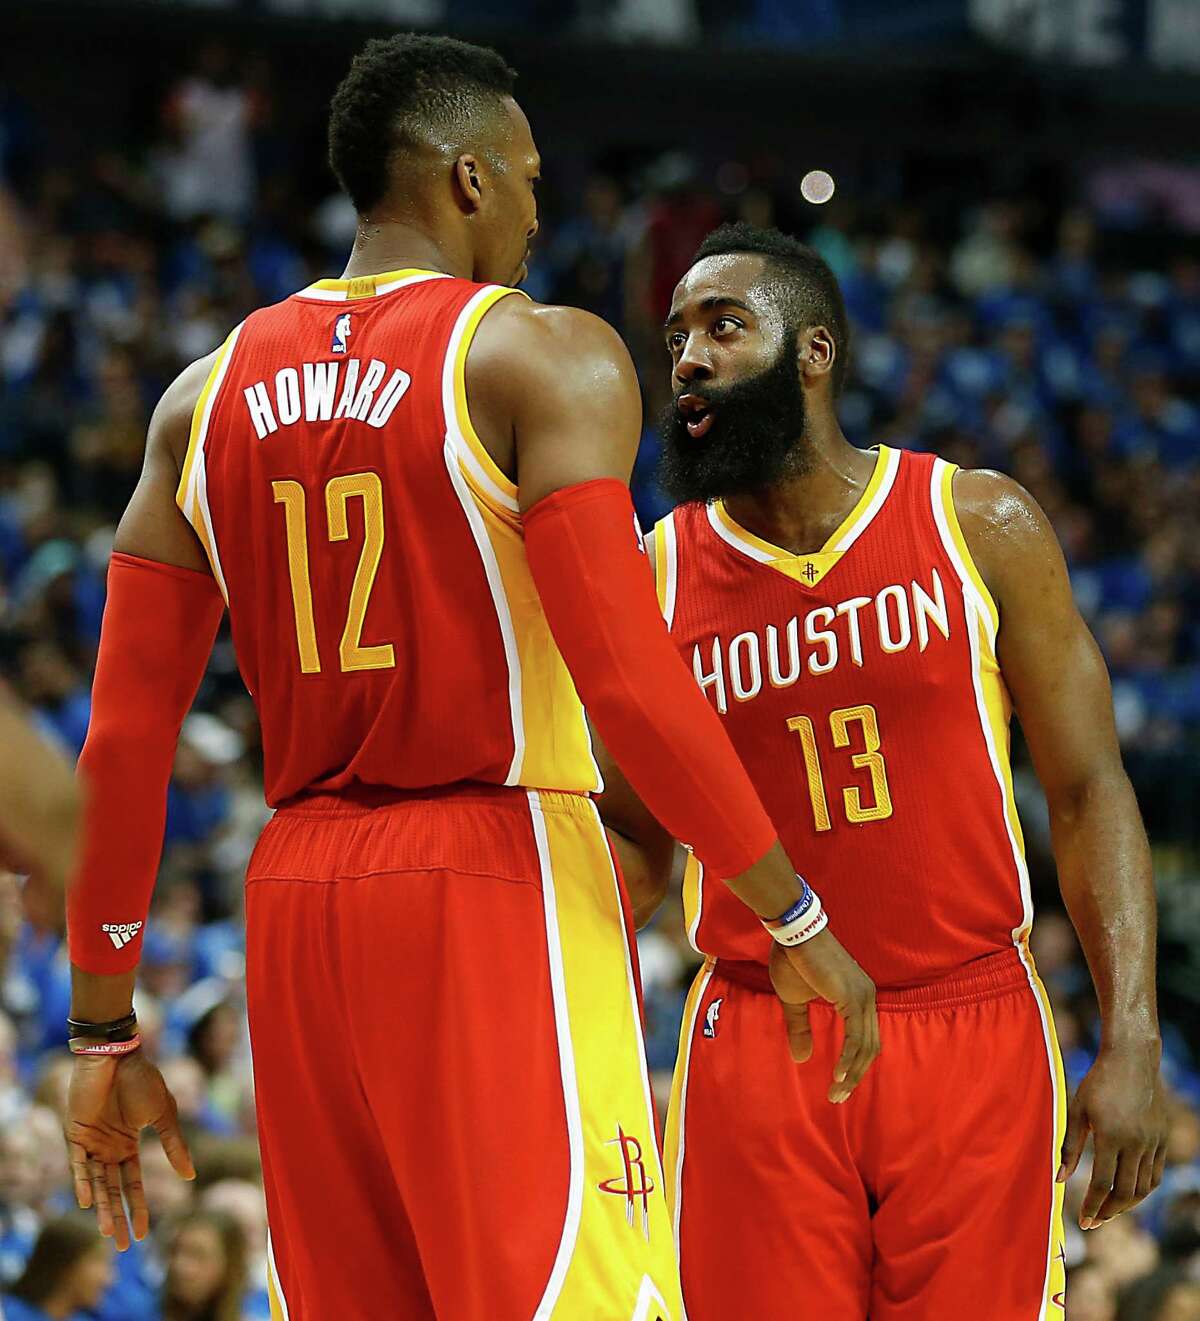 Houston Rockets center Dwight Howard left, and Rockets guard James Harden during the first half of Game 4 in the first round of NBA basketball playoffs against the Dallas Mavericks at the American Airlines Center Sunday, April 26, 2015, in Dallas. ( James Nielsen / Houston Chronicle )